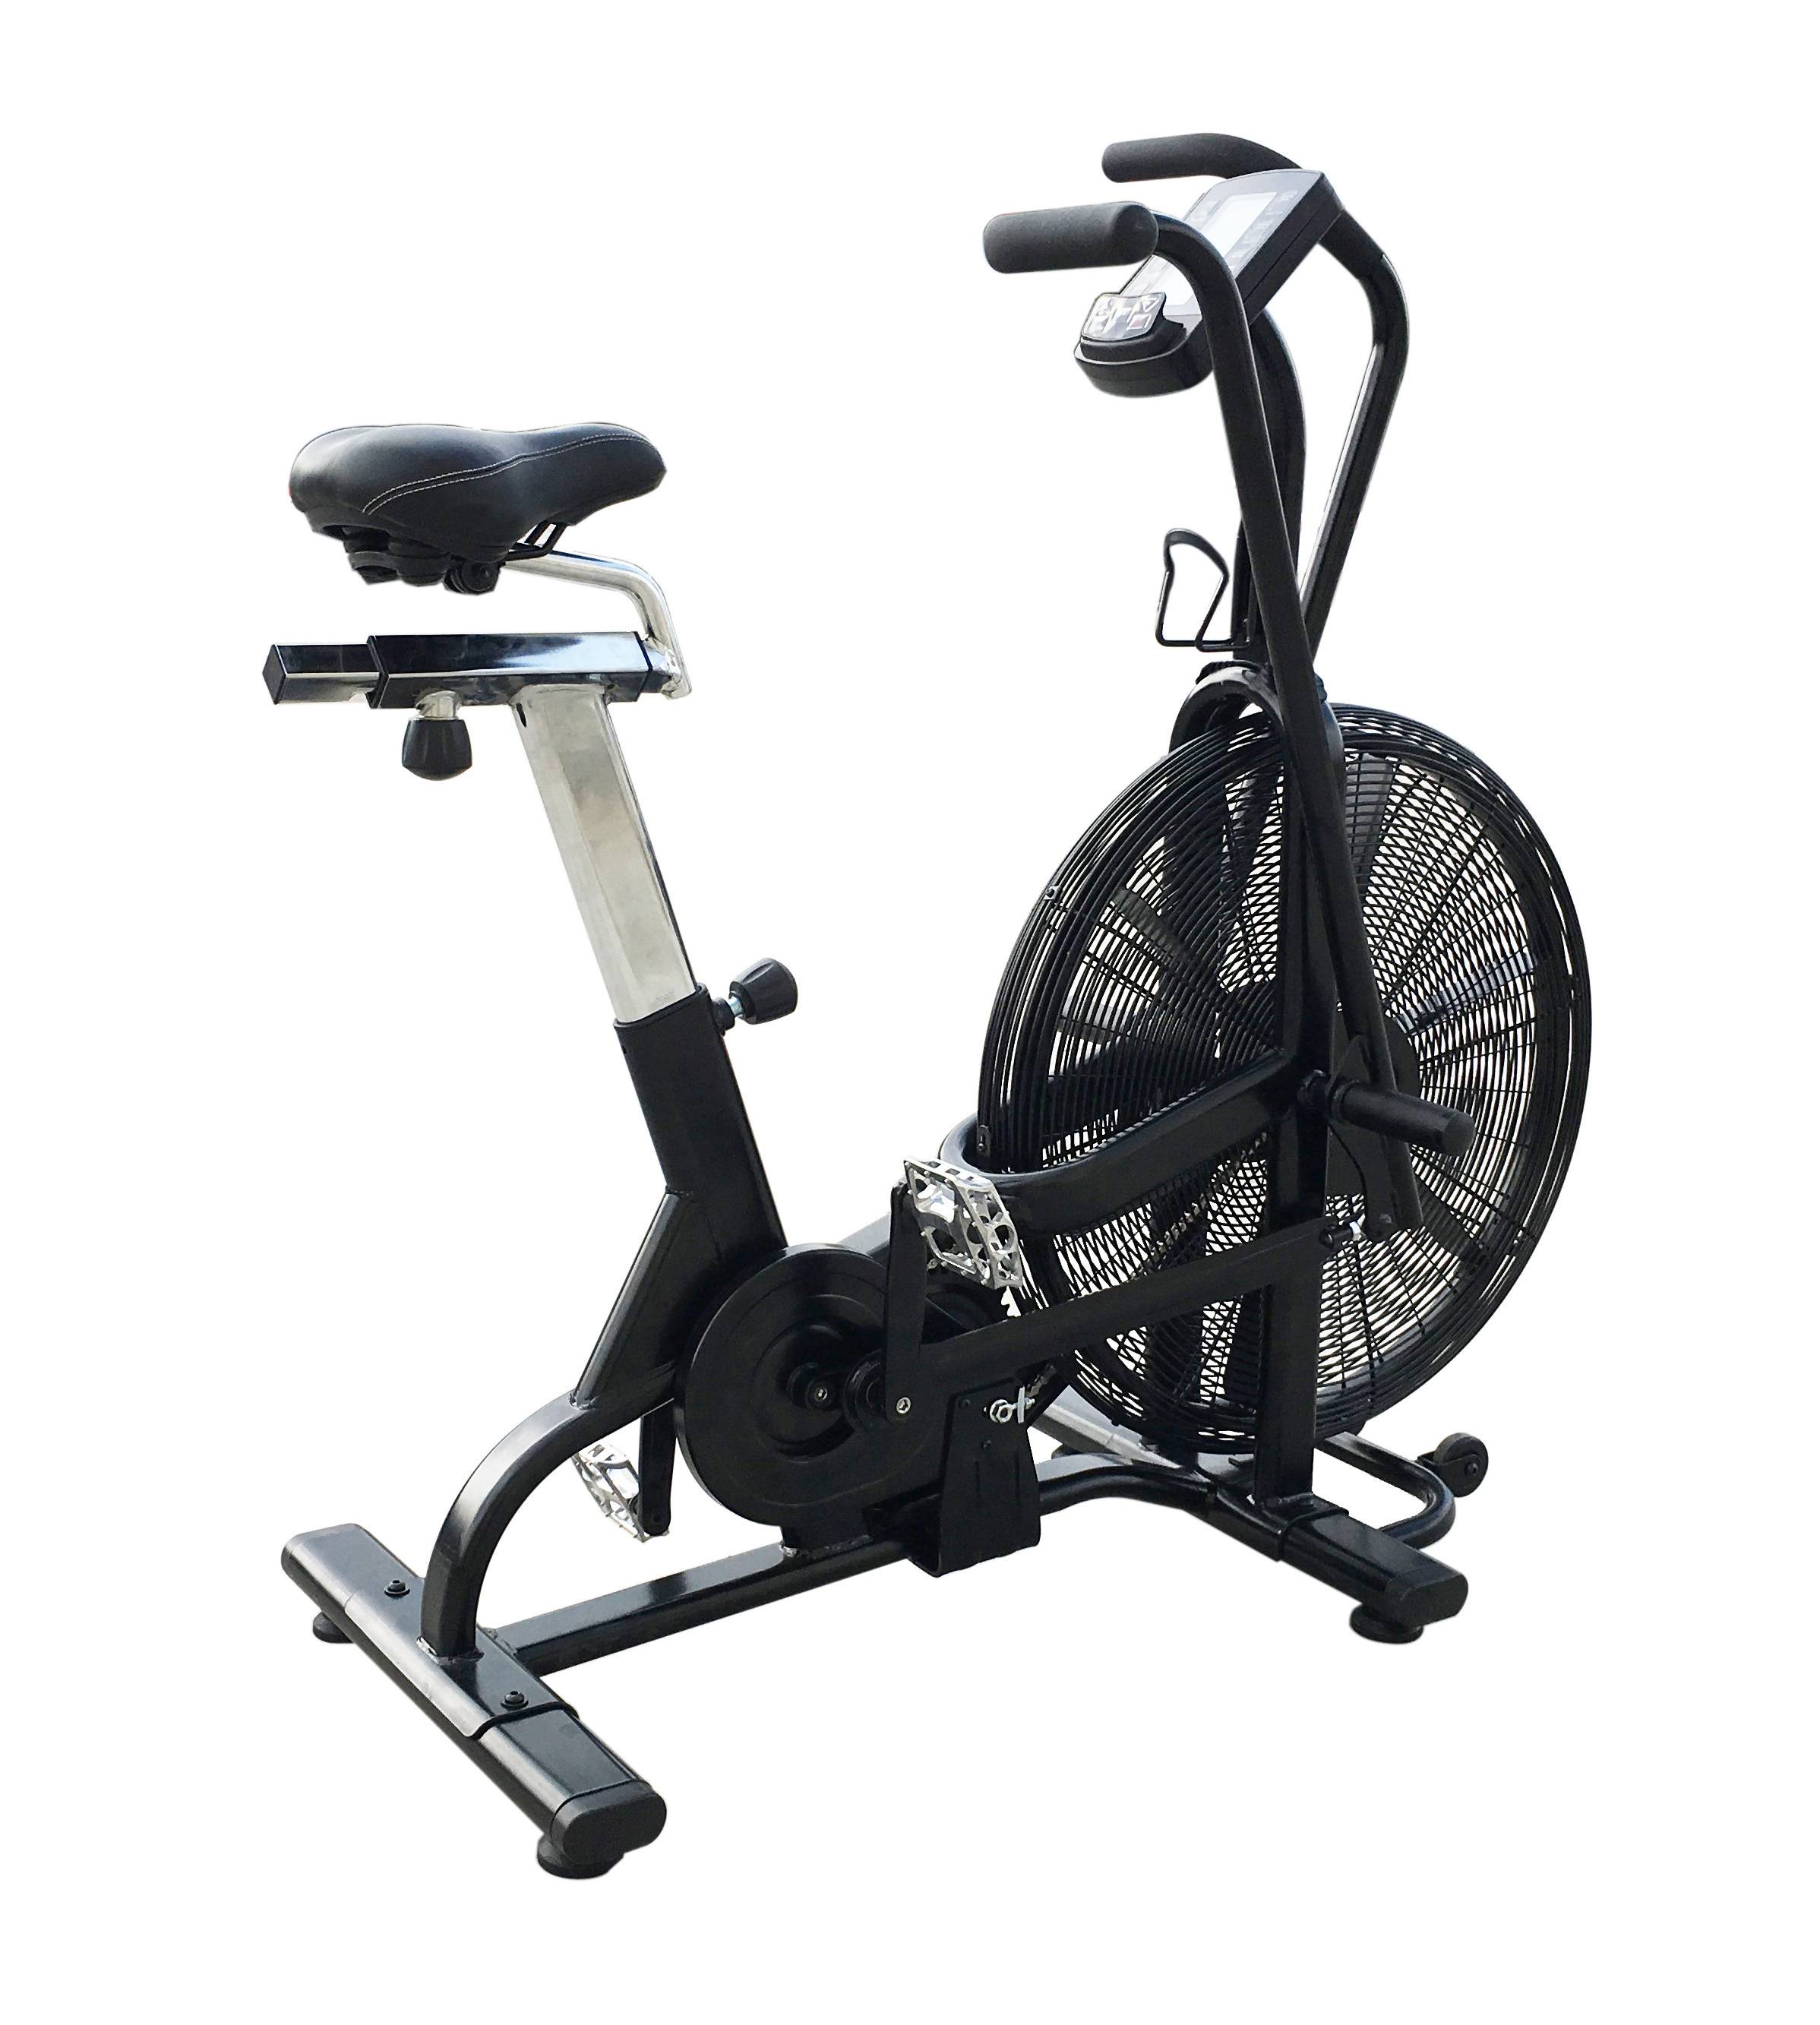 Professional Fitness Equipment For Home Commercial Use Exercise Air Bike Crossfit